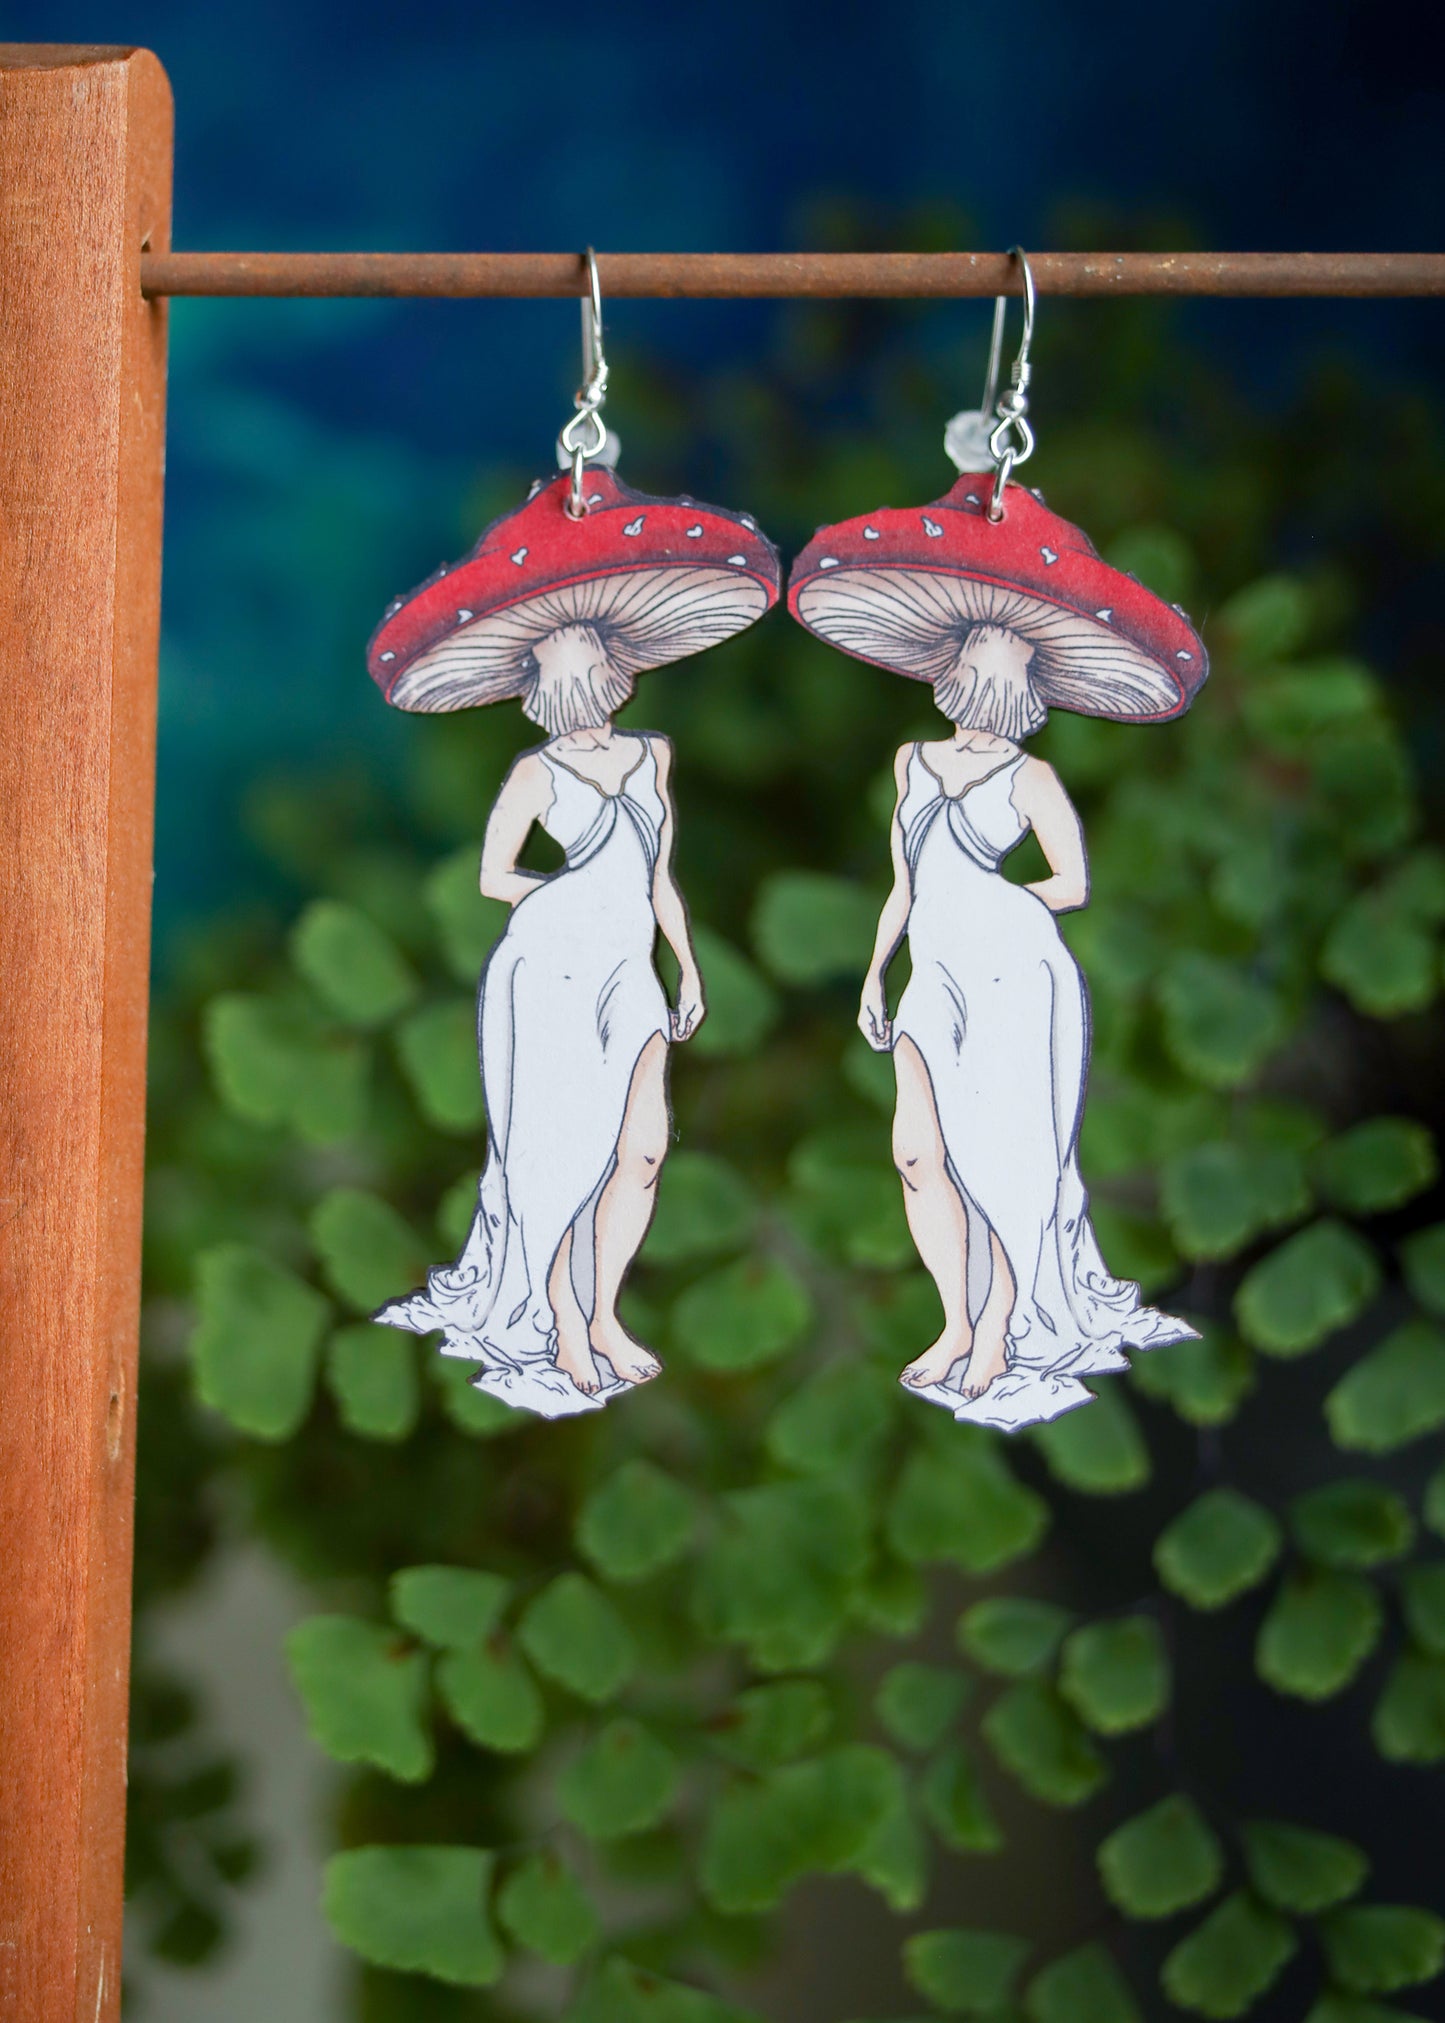 Mushroom Lady Earrings | Cottagecore Fairycore Fungi Jewelry | Mushroomcore Woodland Wooden Dangles | Sterling Silver Symmertrical Cute Art